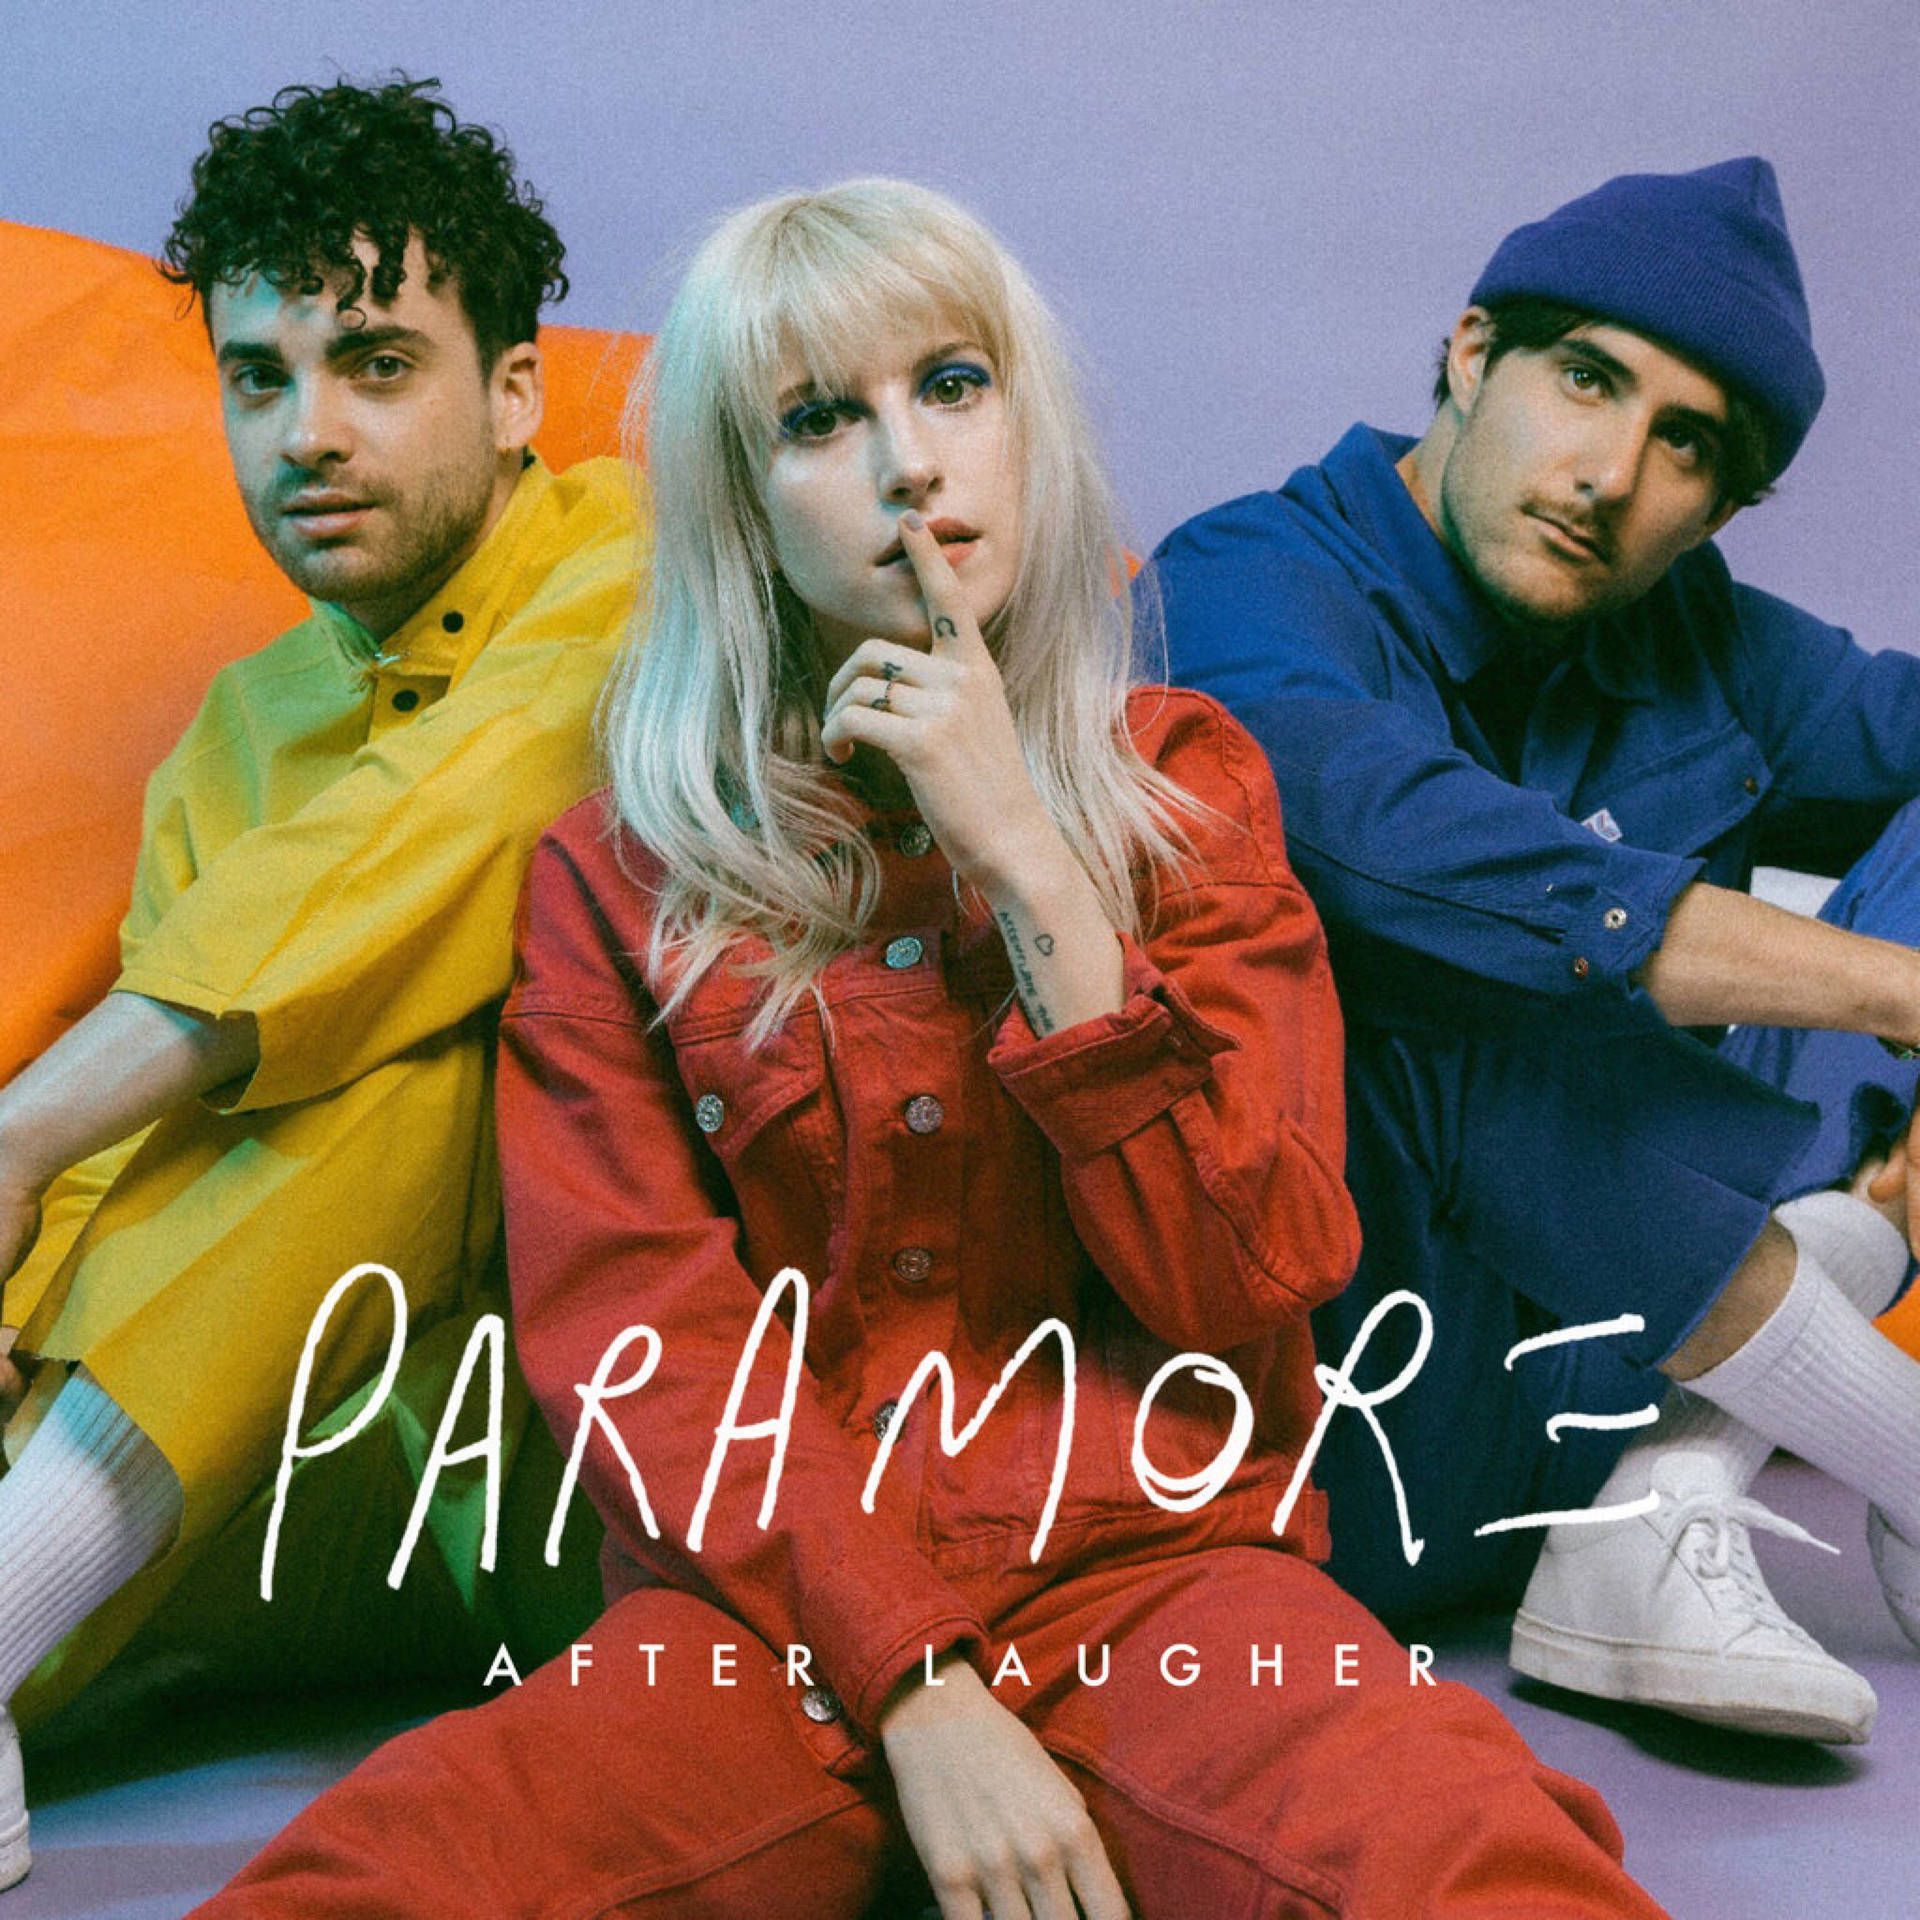 Paramore After Laughter Cover wallpaper.